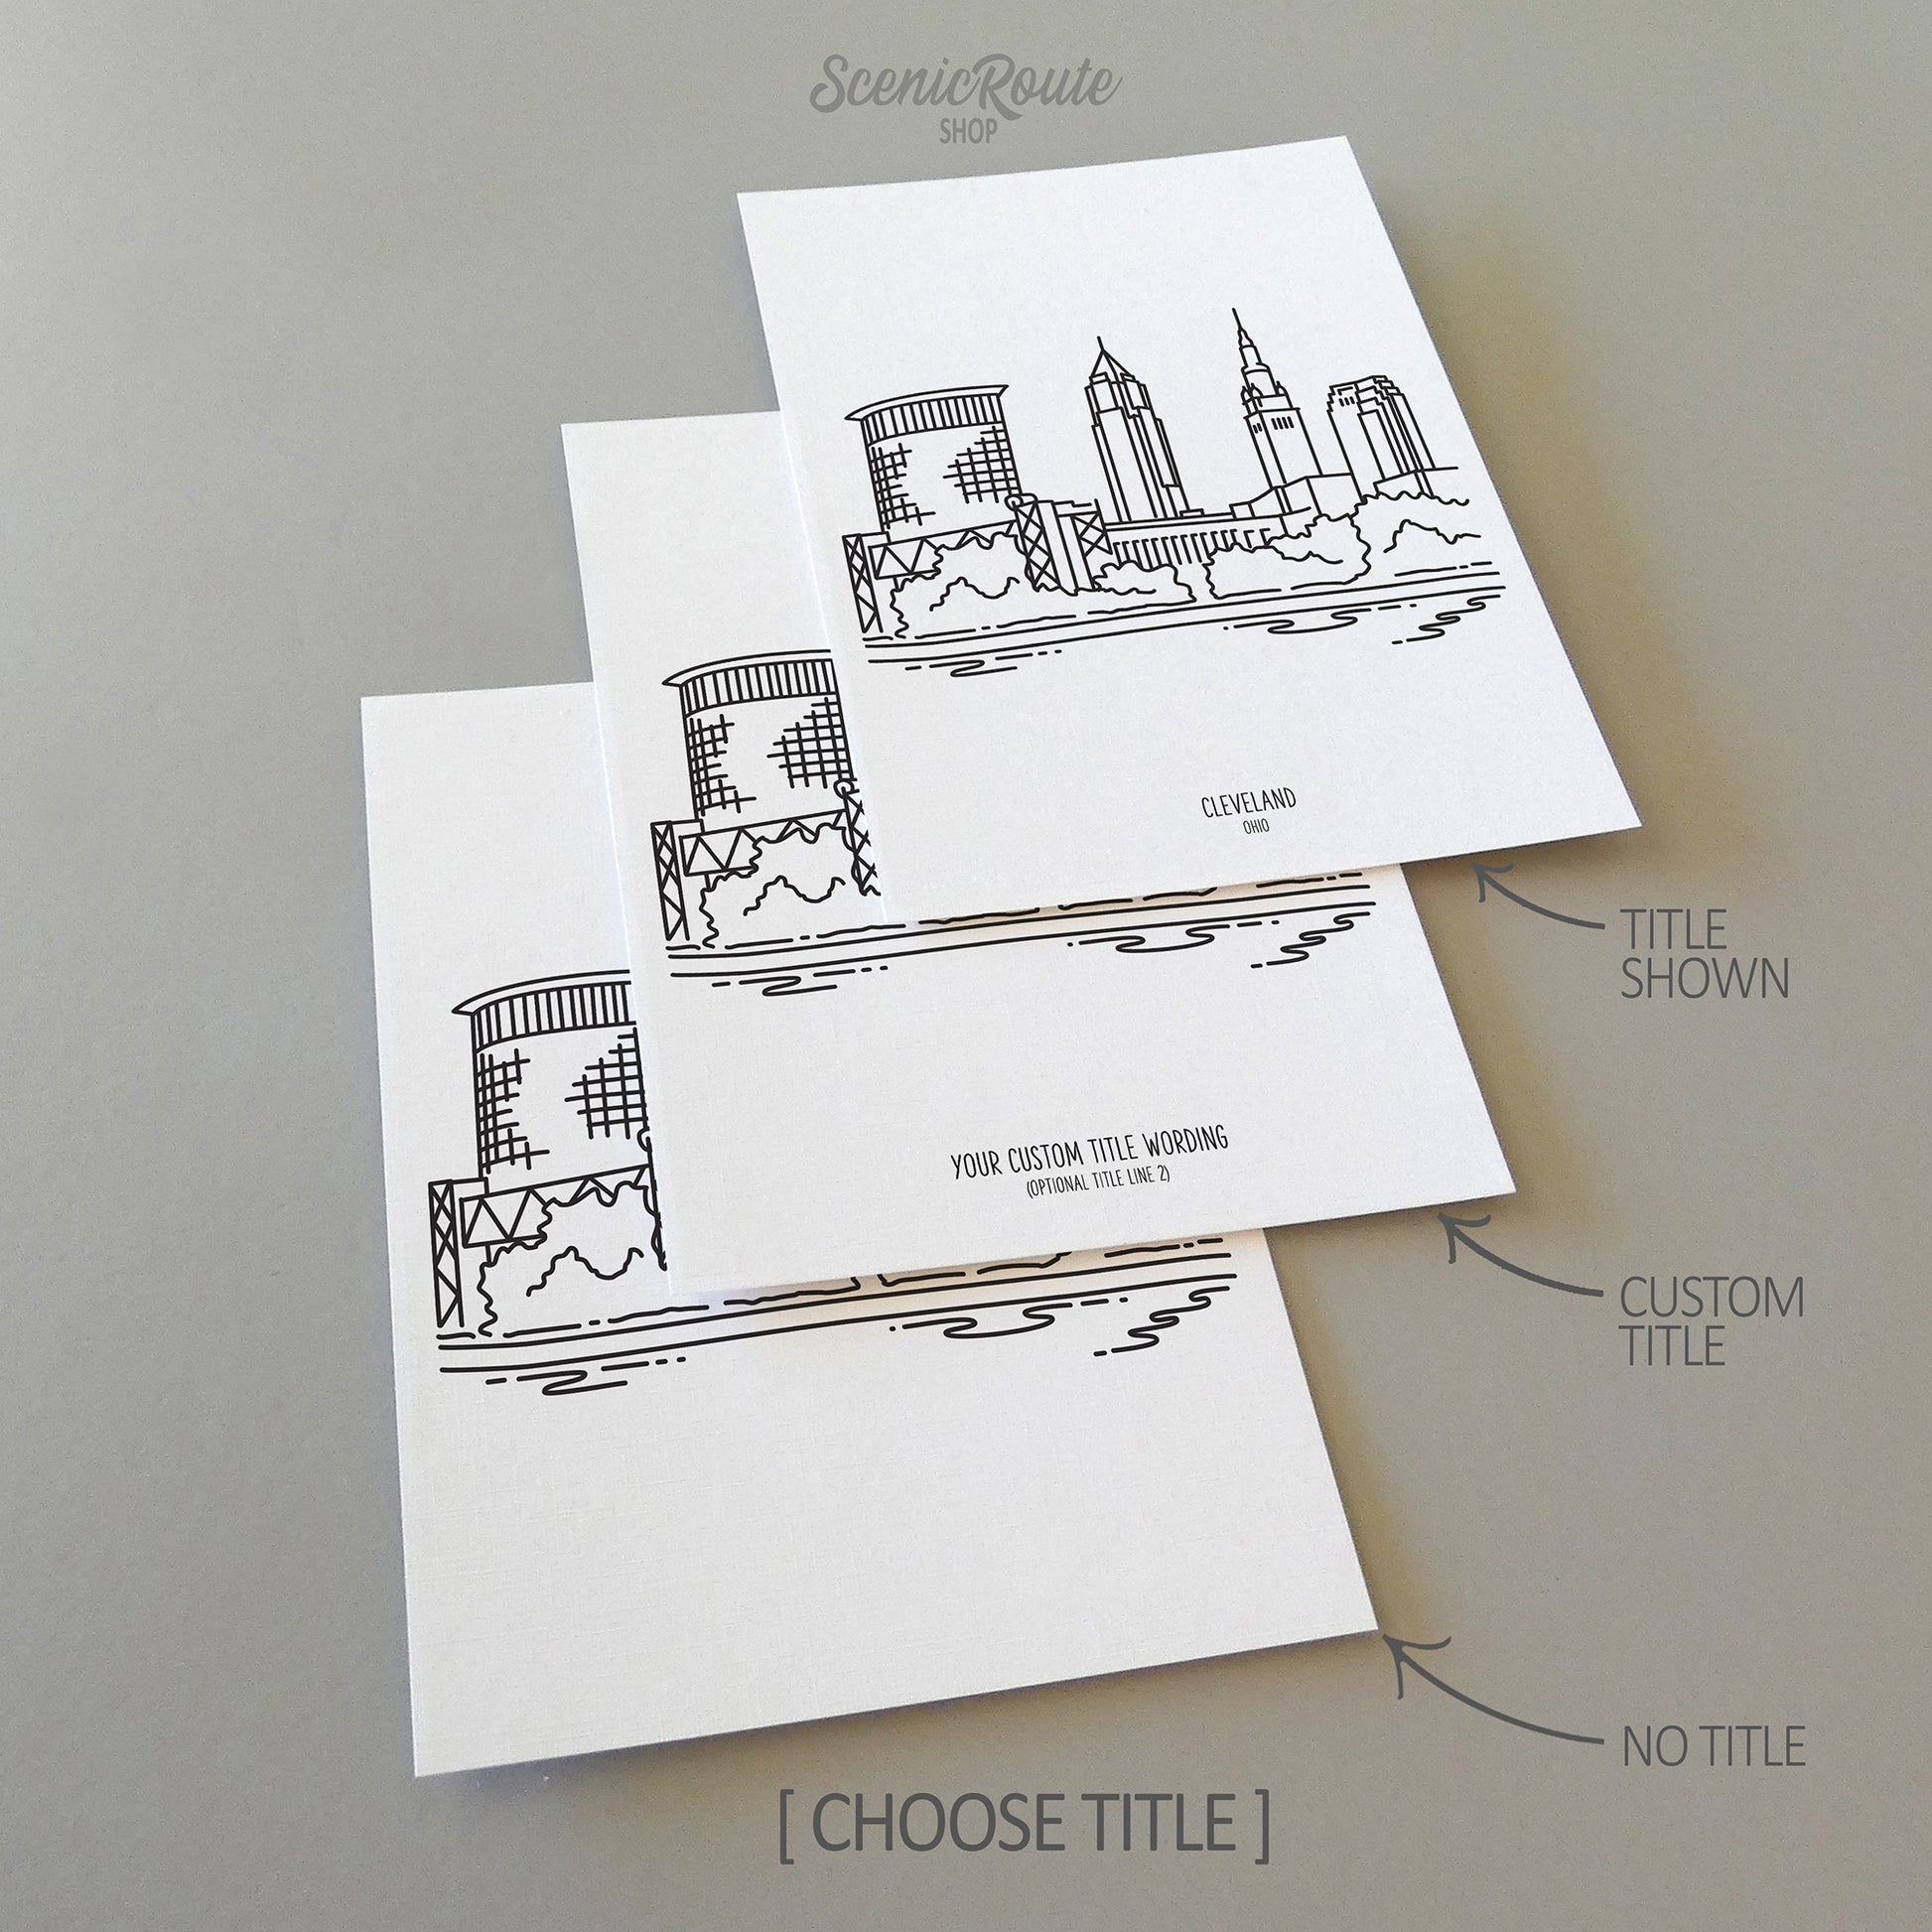 Three line art drawings of the Cleveland Ohio Skyline on white linen paper with a gray background. The pieces are shown with title options that can be chosen and personalized.